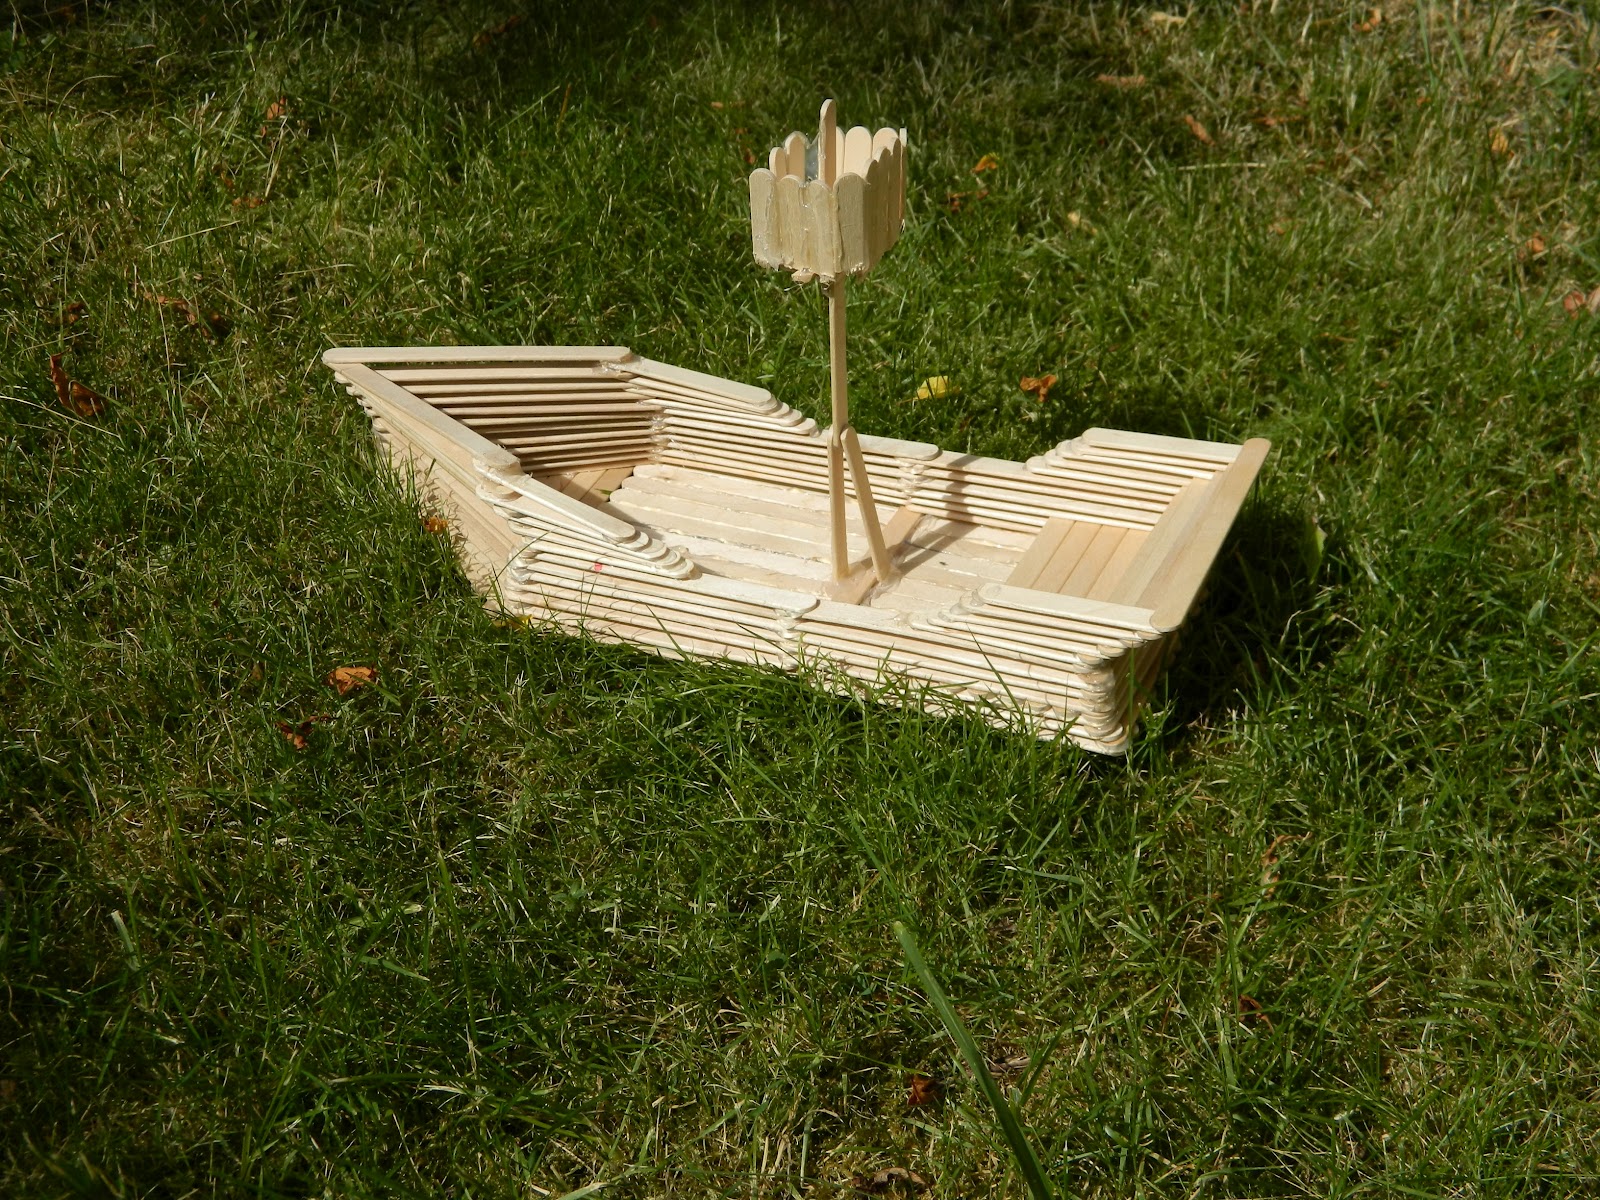 How To Make A Boat Out Of Popsicle Sticks Apps Directories